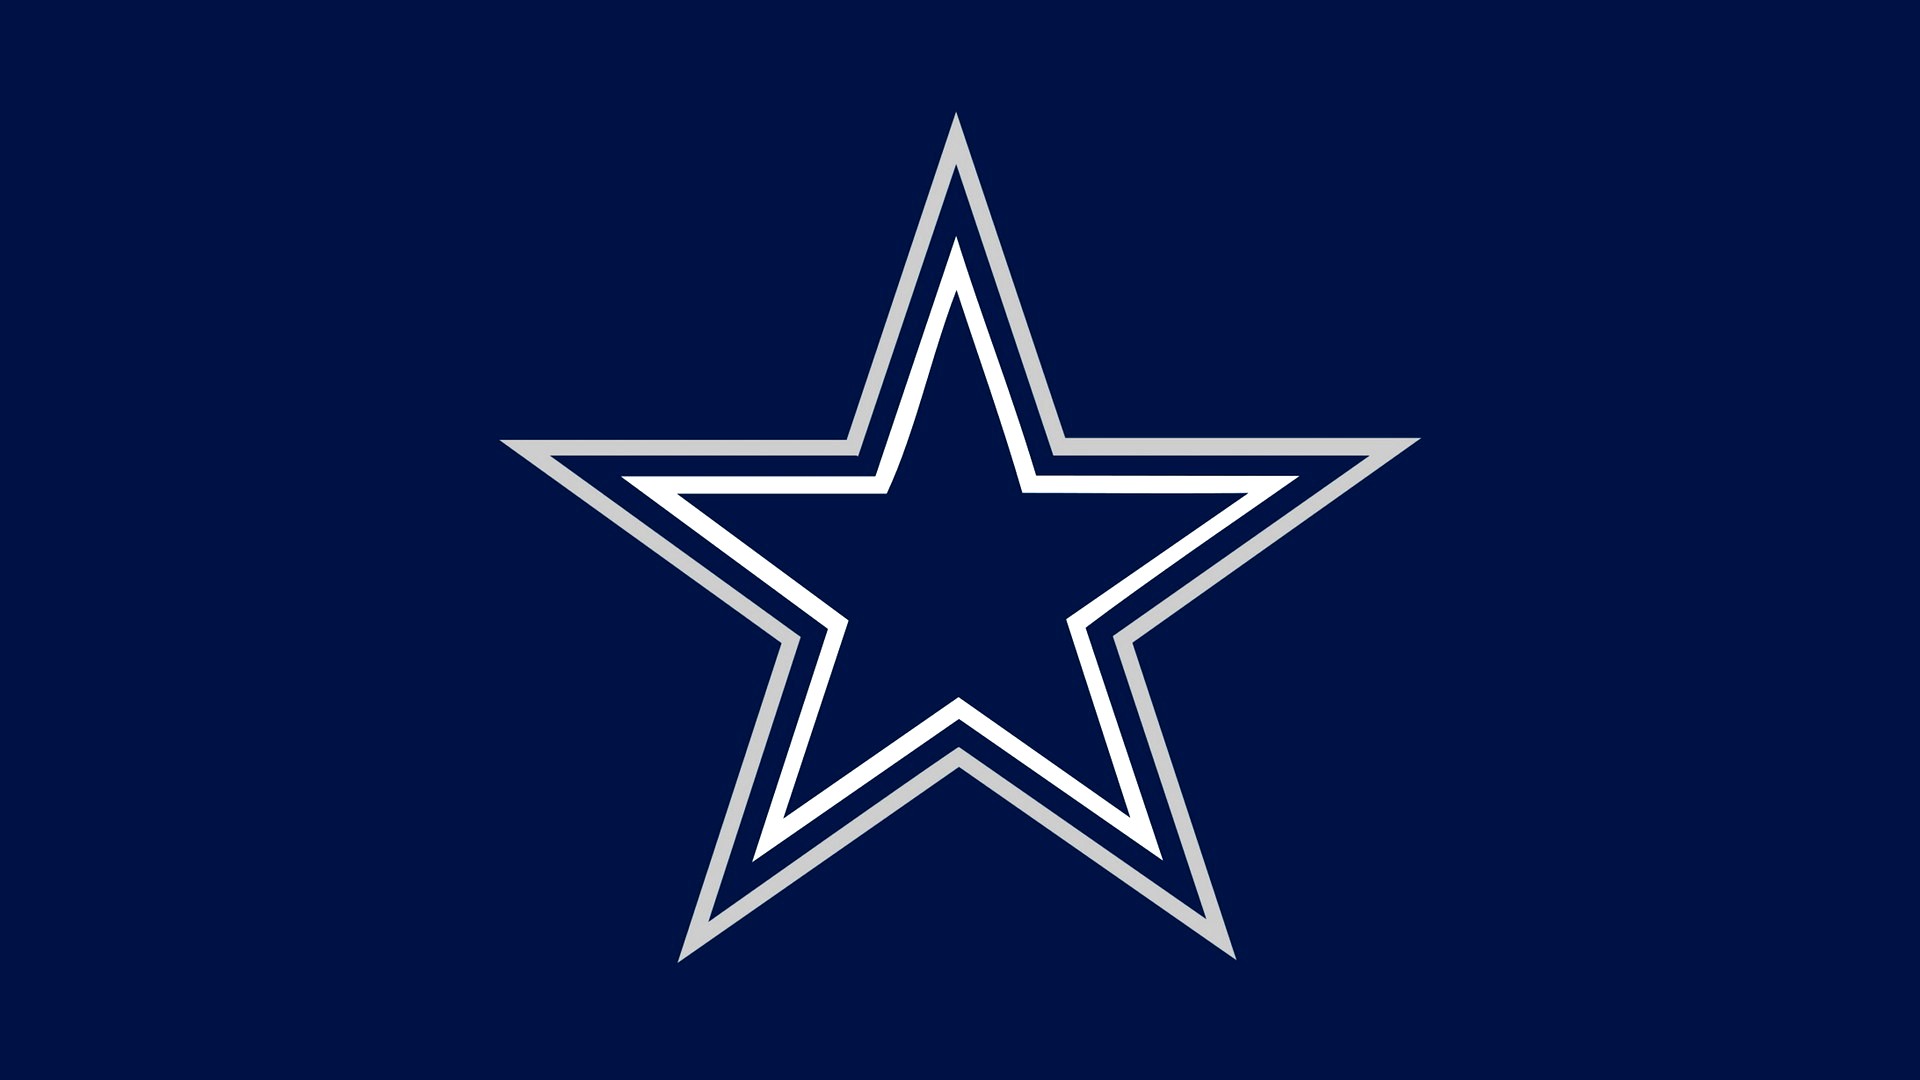 Dallas Cowboys Mac Wallpaper with high-resolution 1920x1080 pixel. You can use and set as wallpaper for Notebook Screensavers, Mac Wallpapers, Mobile Home Screen, iPhone or Android Phones Lock Screen